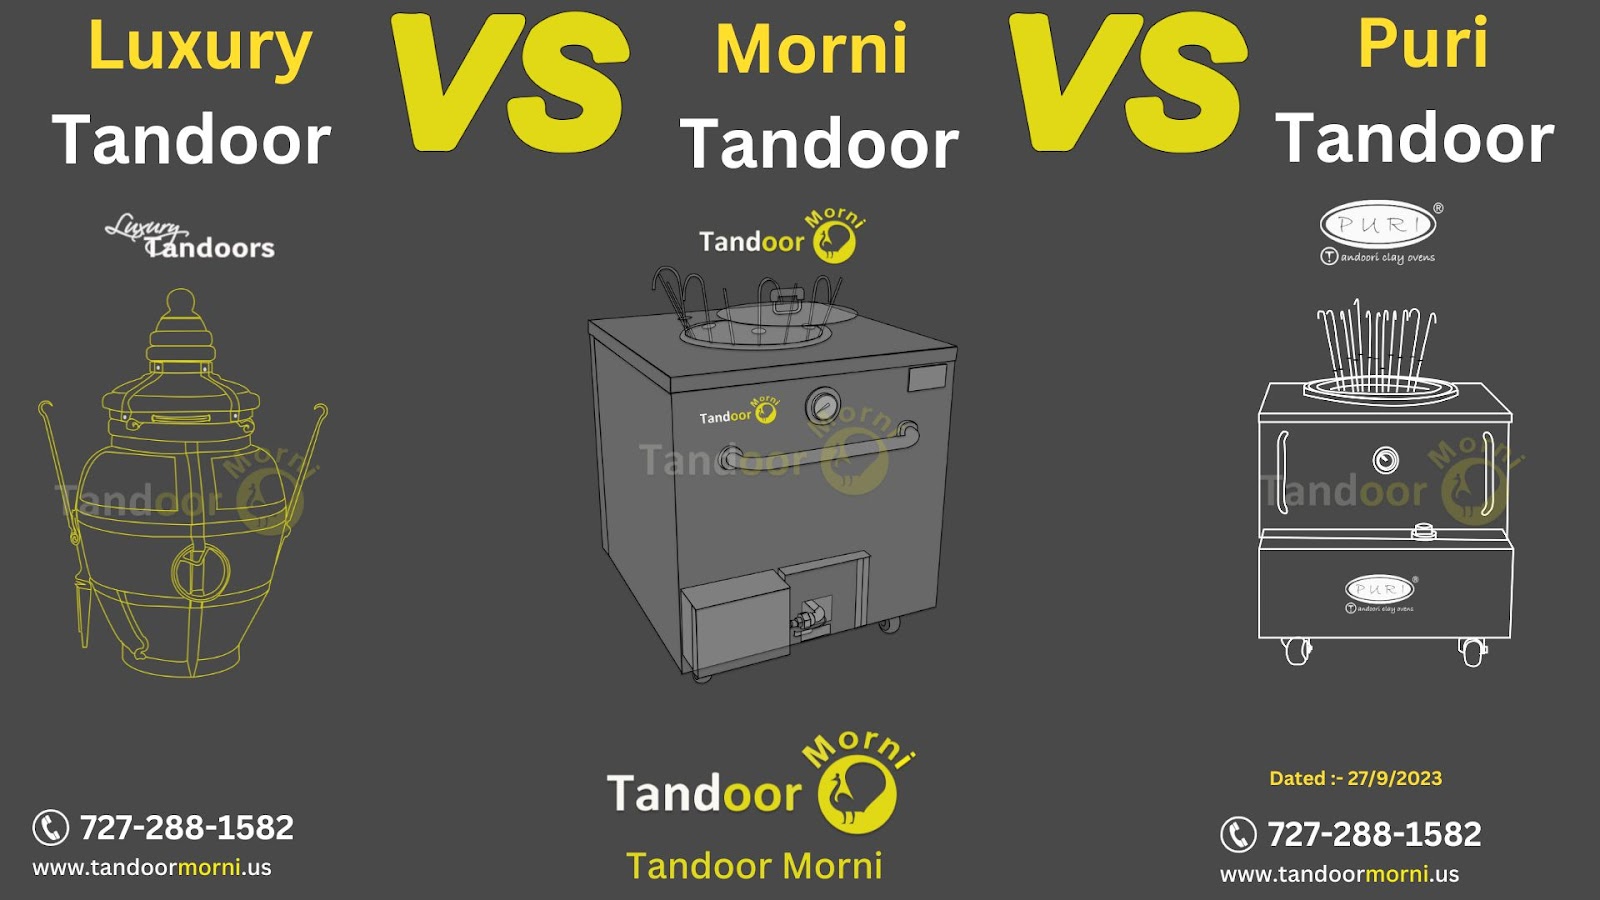 The graphic depicts the distinction between Luxury Tandoor vs Morni Tandoor vs Puri Tandoor. 

The illustration depicts a graphical representation of all three tandoors, namely Luxury Tandoor, Morni Tandoor, and Puri Tandoor.